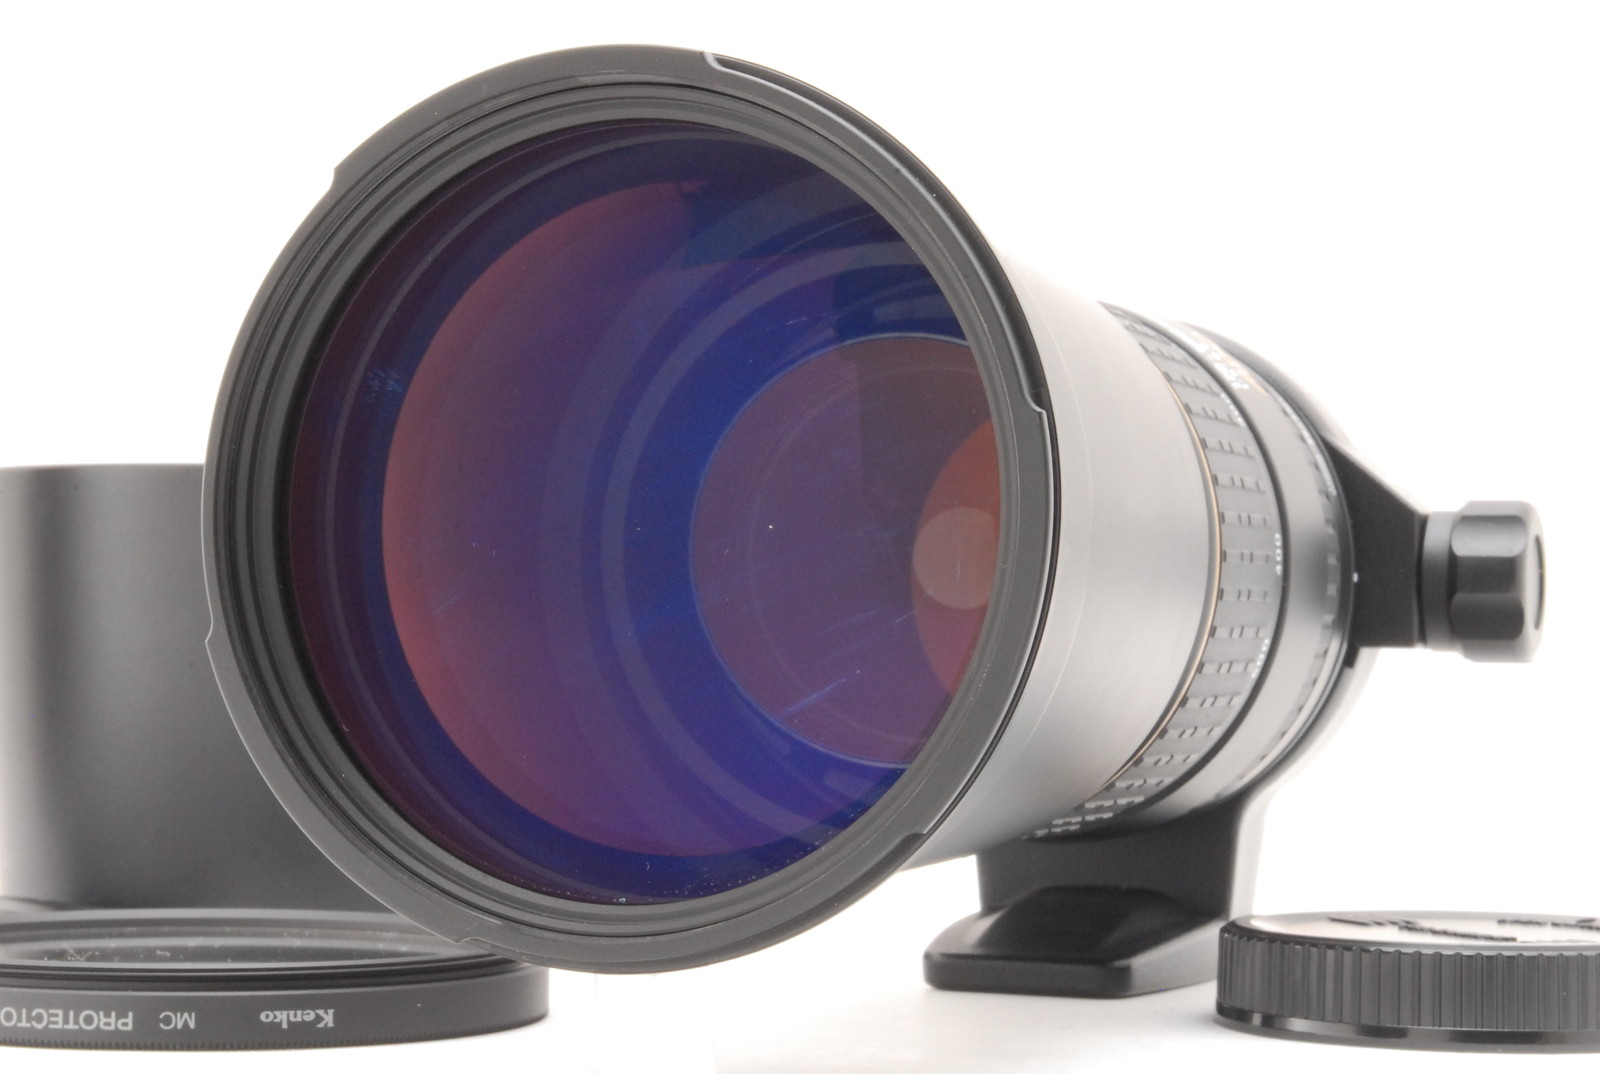 PROMOTION.APPEARANCE NEAR MINT SIGMA APO 170-500mm f/5-6.3 for Canon from Japan